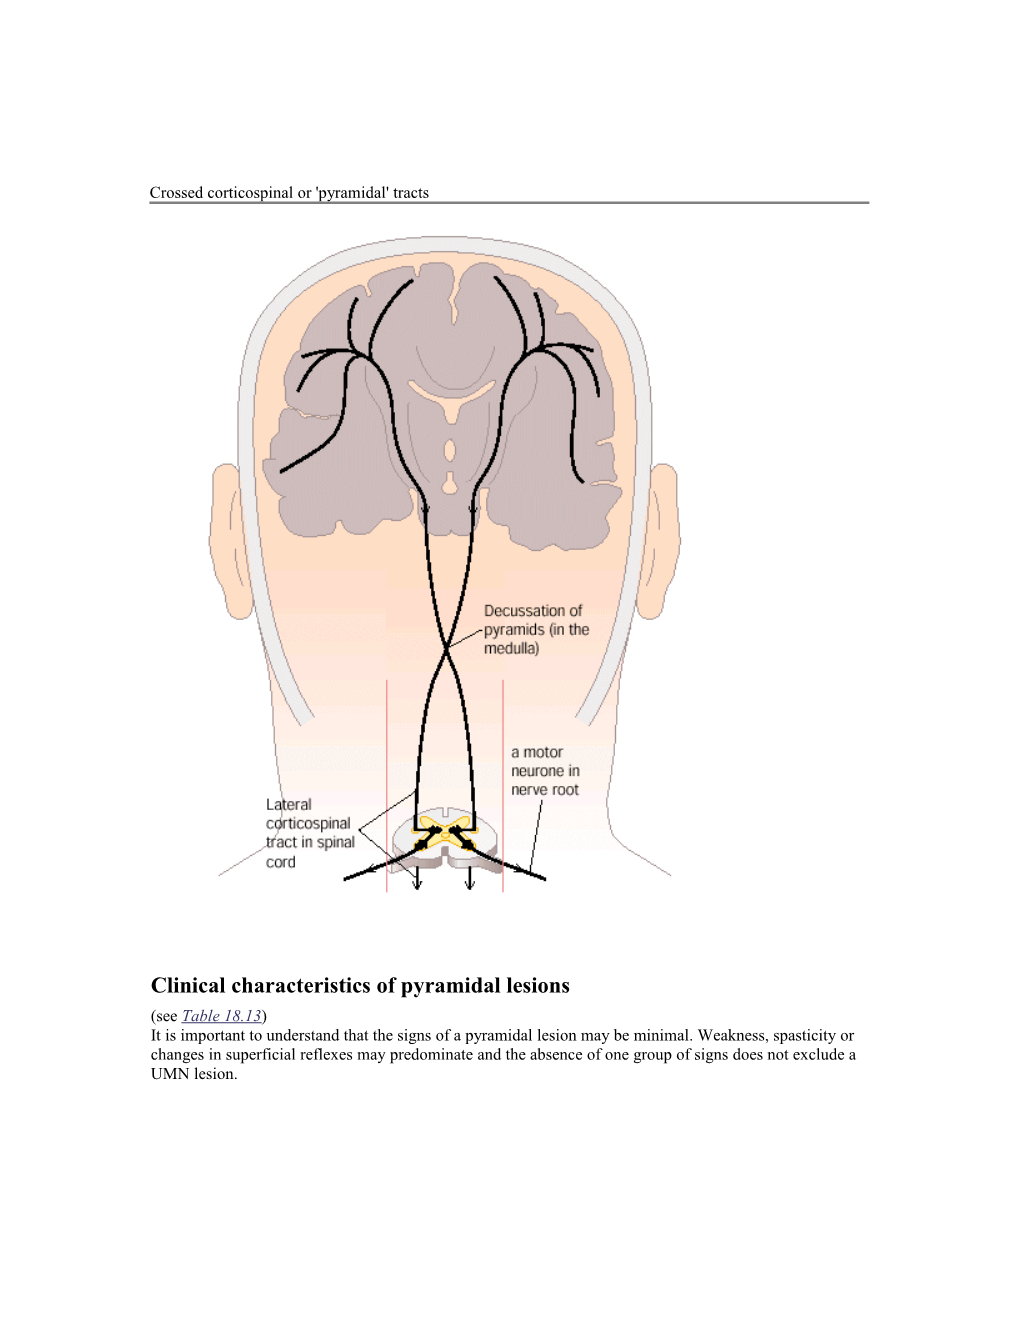 Crossed Corticospinal Or 'Pyramidal' Tracts